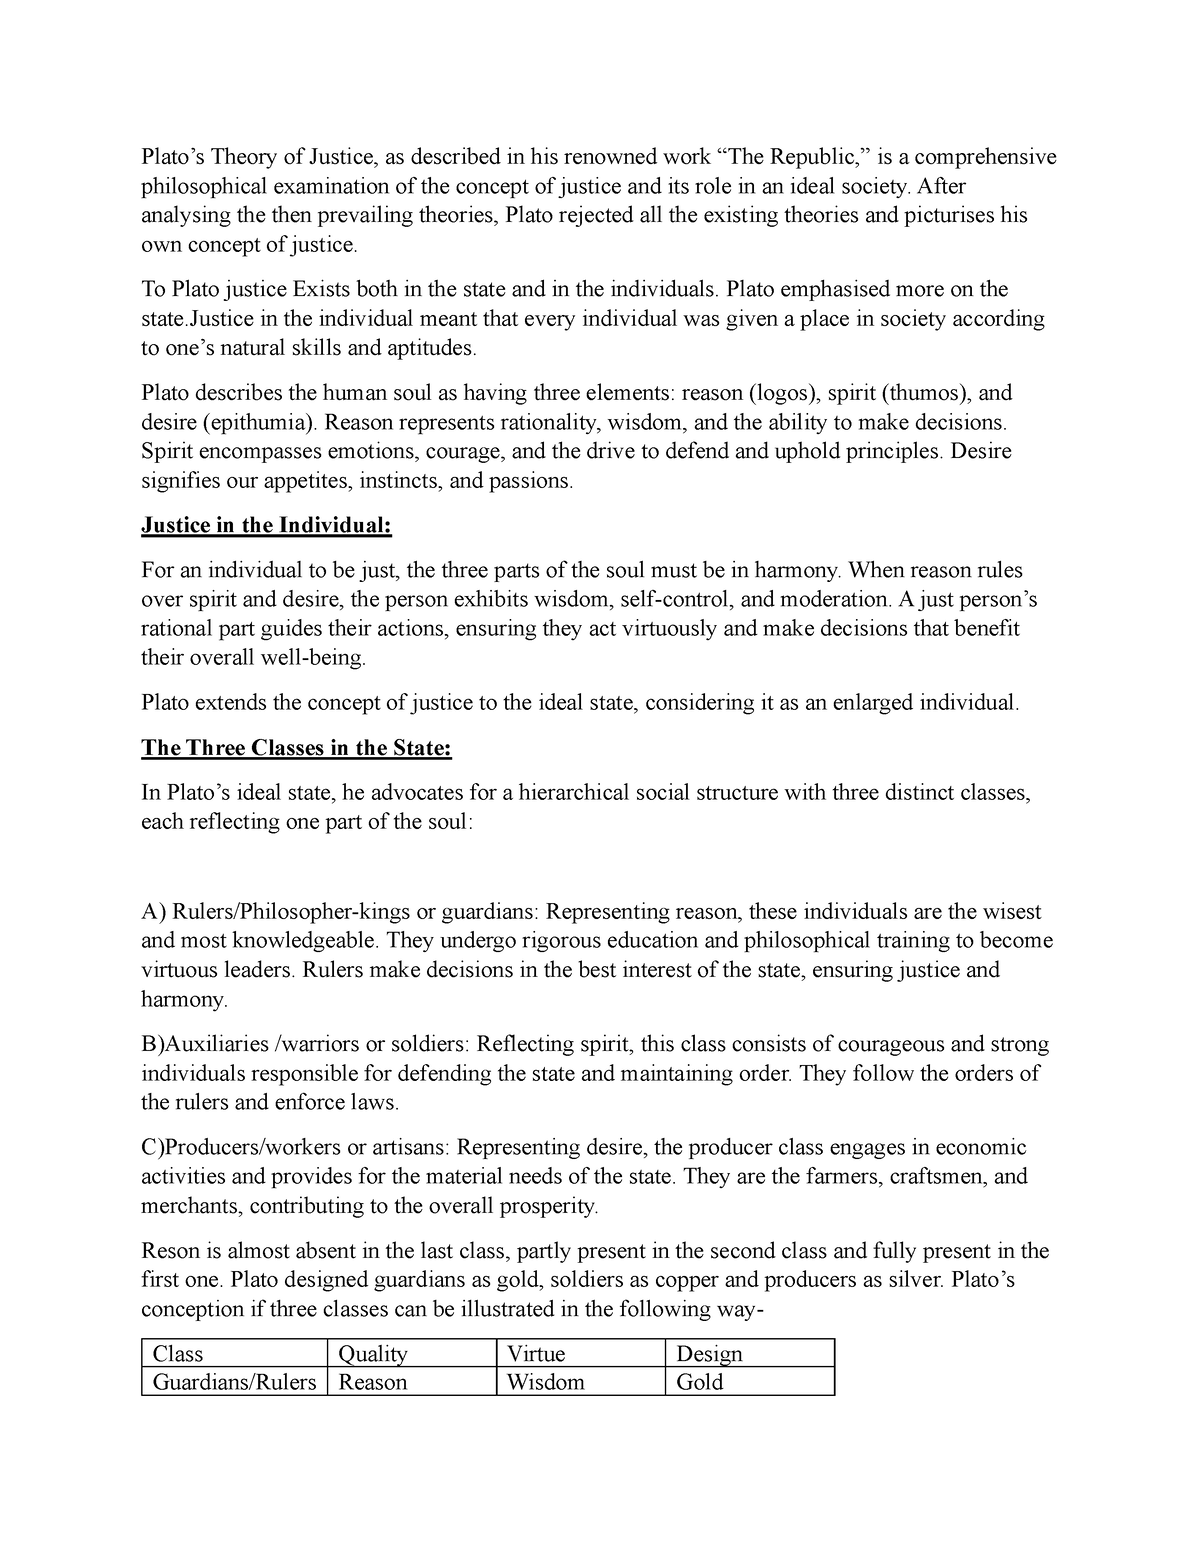 Document-Plato' theory of justice. - Plato’s Theory of Justice, as ...